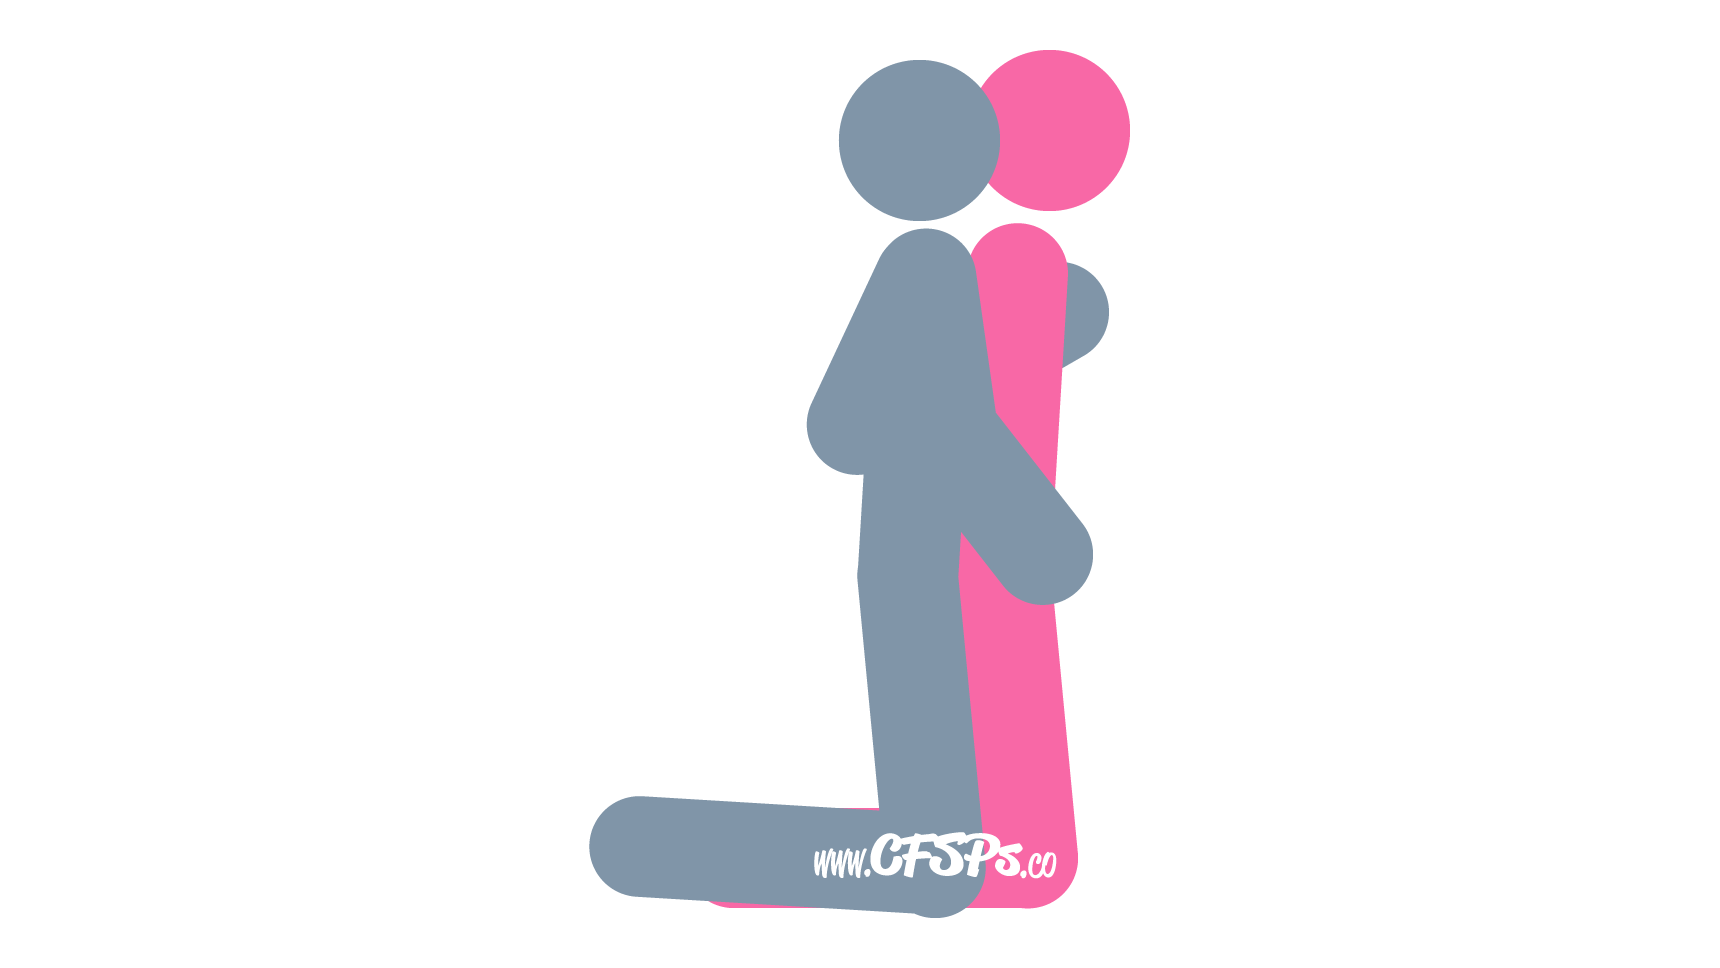 This stick figure image depicts a man and woman engaging in manual sex in the Oath manual sex position. The woman is kneeling. The man is kneeling behind her and manually stimulating her clitoris and breasts with his hands.